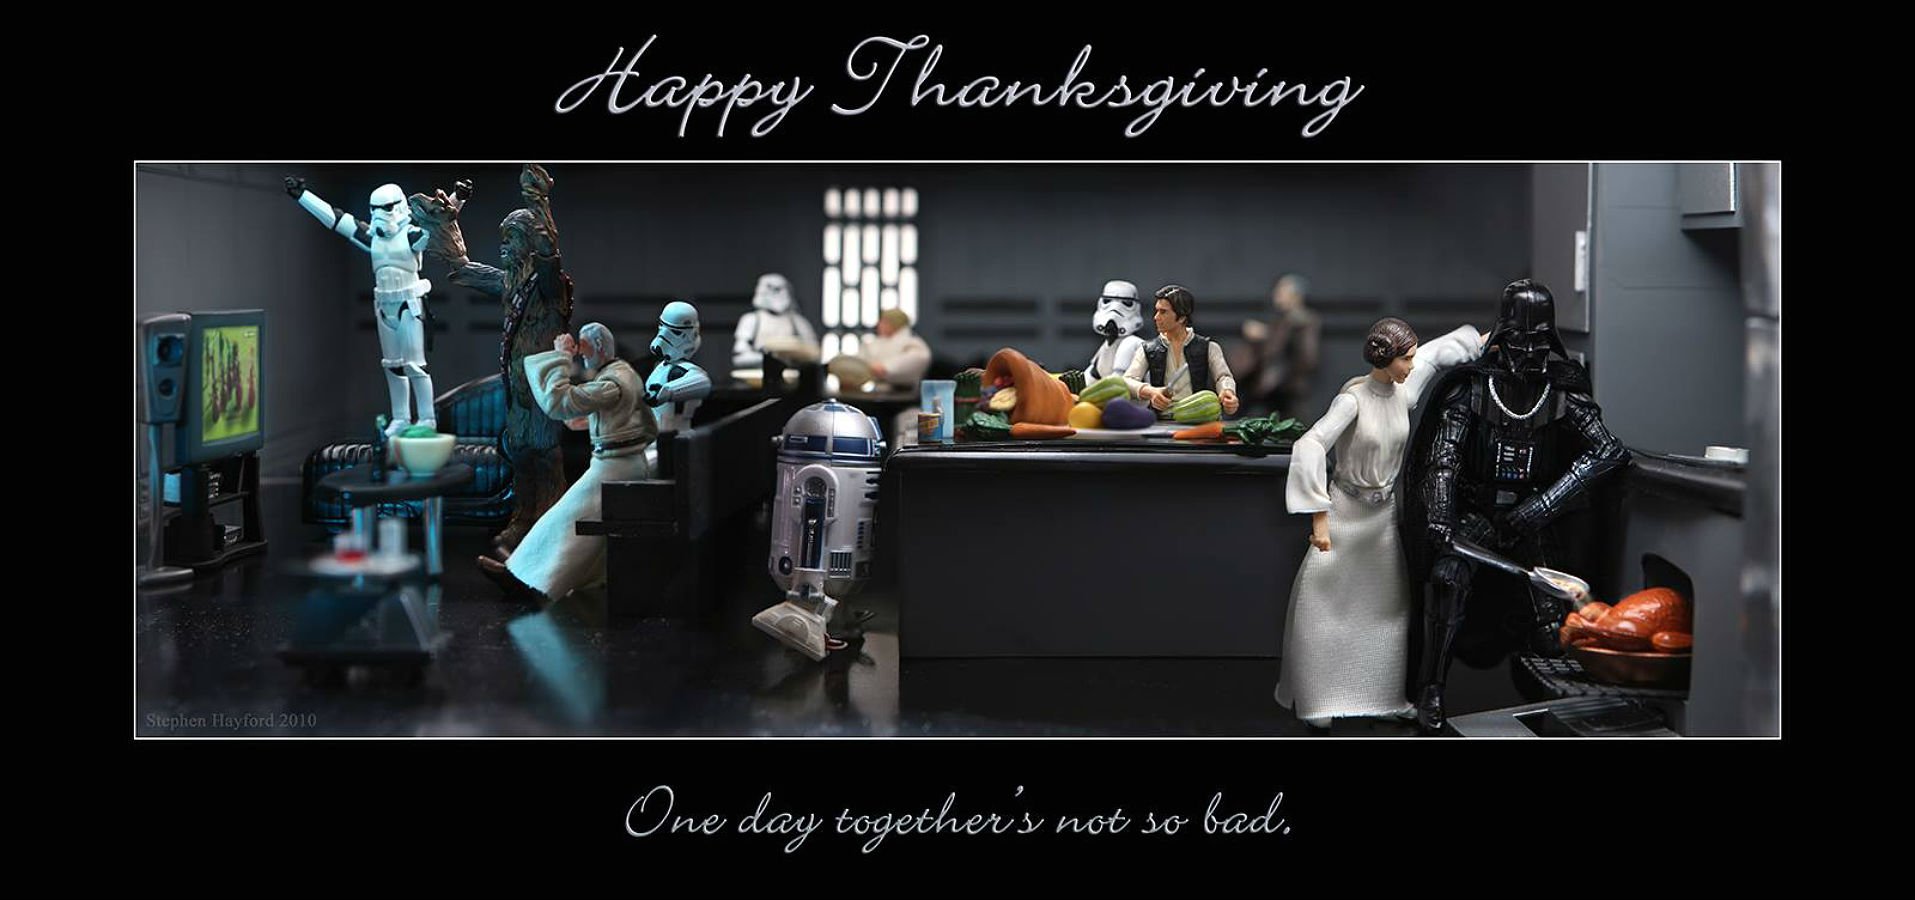 star, Wars, Sci fi, Action, Fighting, Futuristic, Series, Adventure, Disney, Poster, Thanksgiving, Holiday Wallpaper